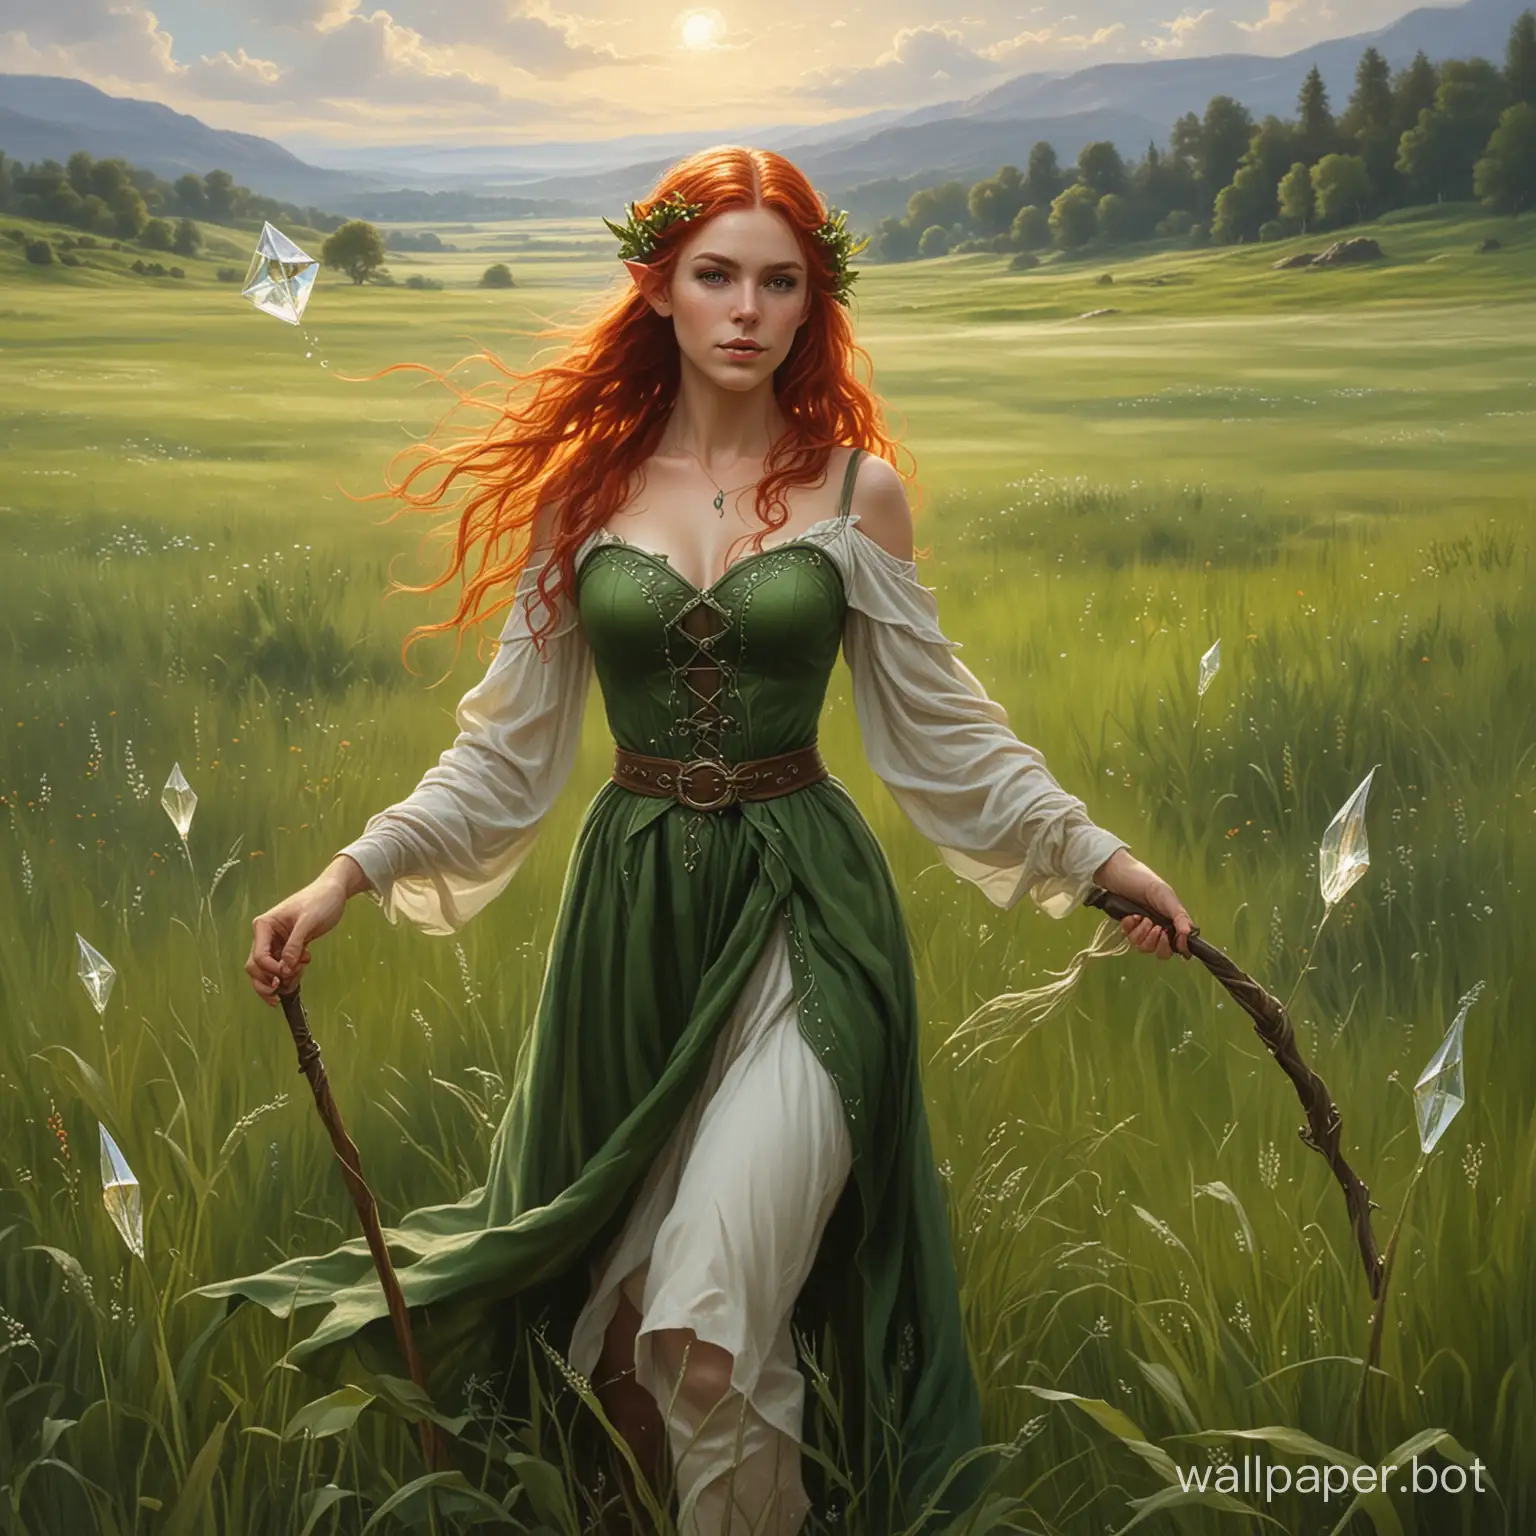 Enchanting-Elf-Woman-with-Crystal-Staff-in-Grassy-Meadow